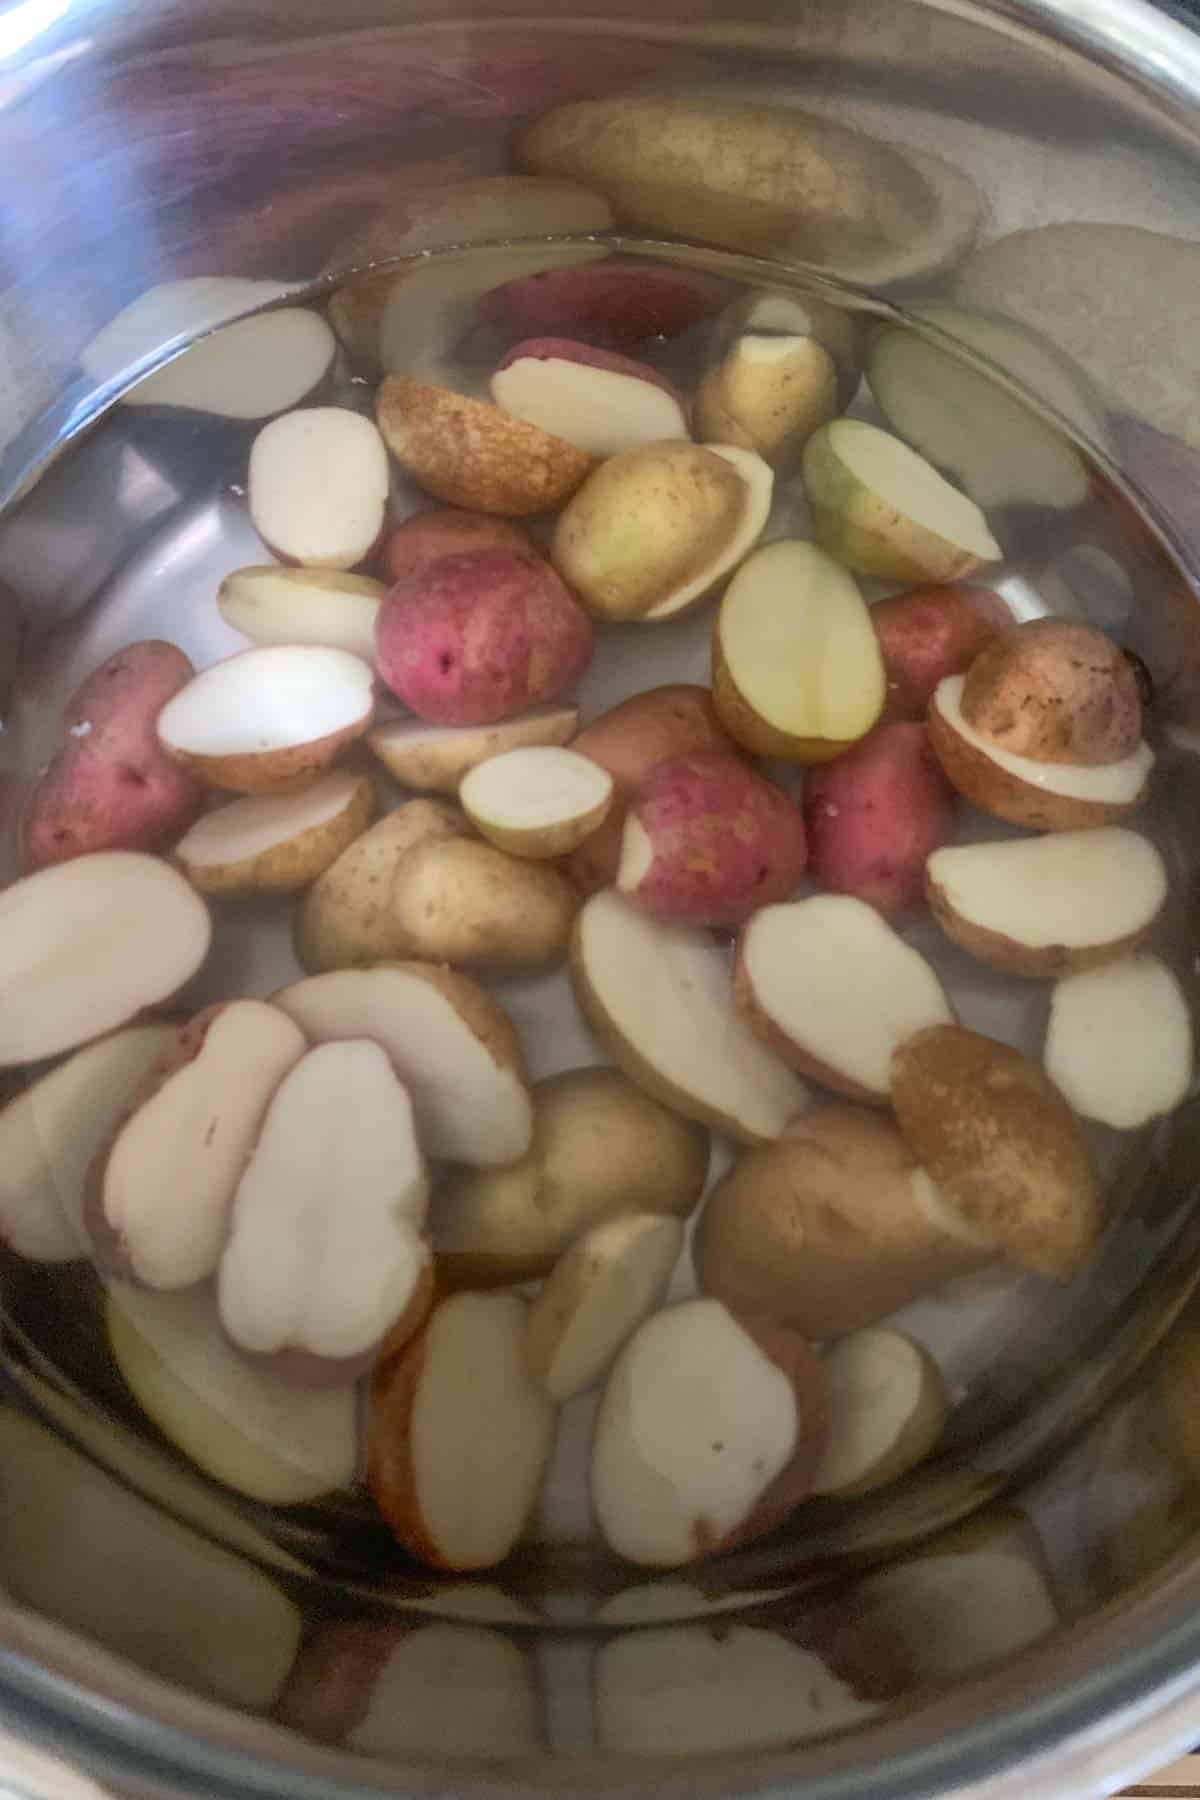 Potatoes in water being set to cook in a pan.